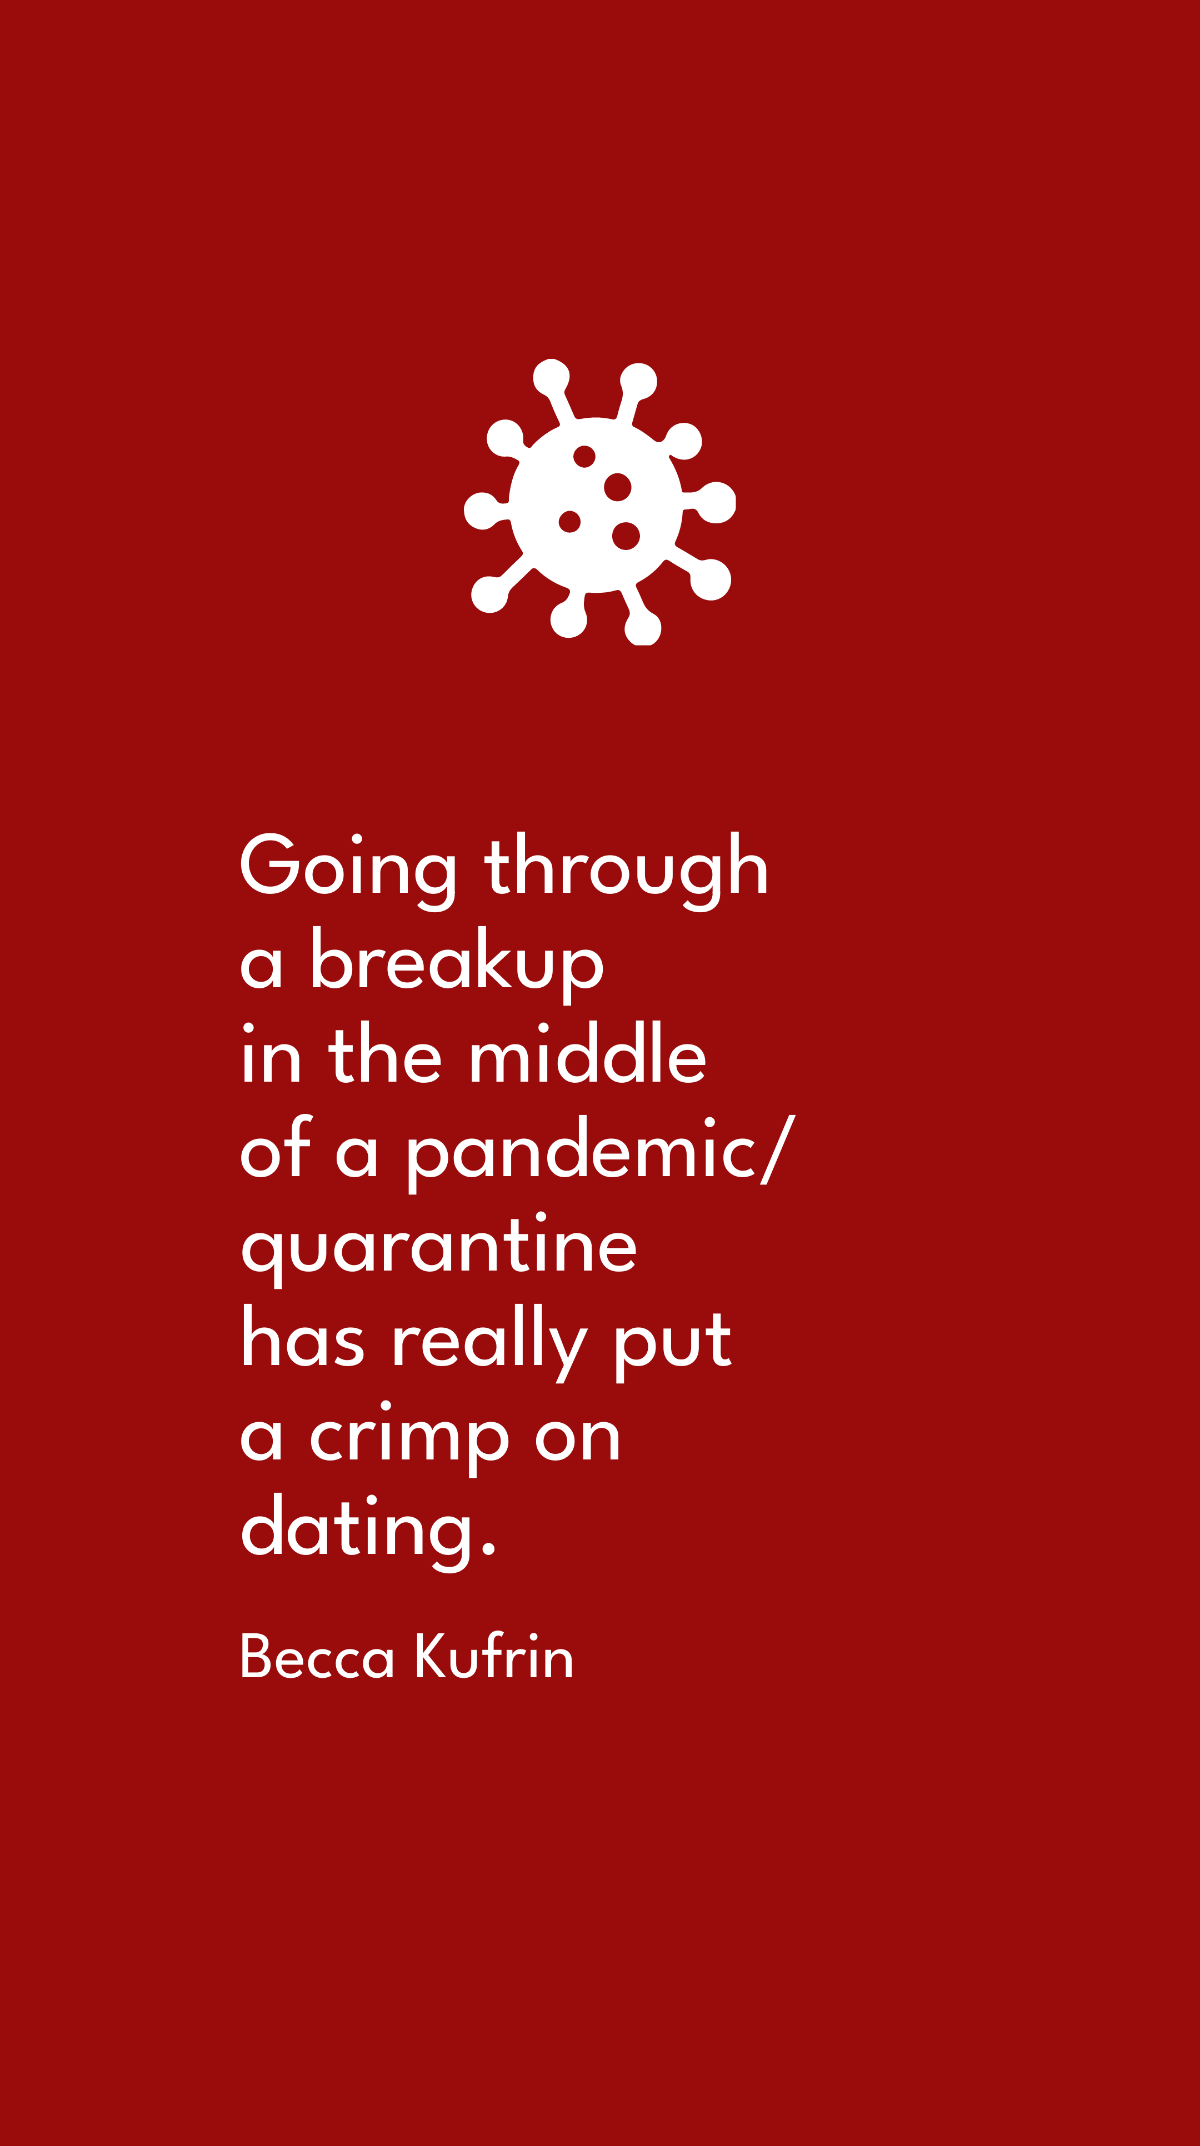 Free Becca Kufrin - Going through a breakup in the middle of a pandemic/quarantine has really put a crimp on dating. Template